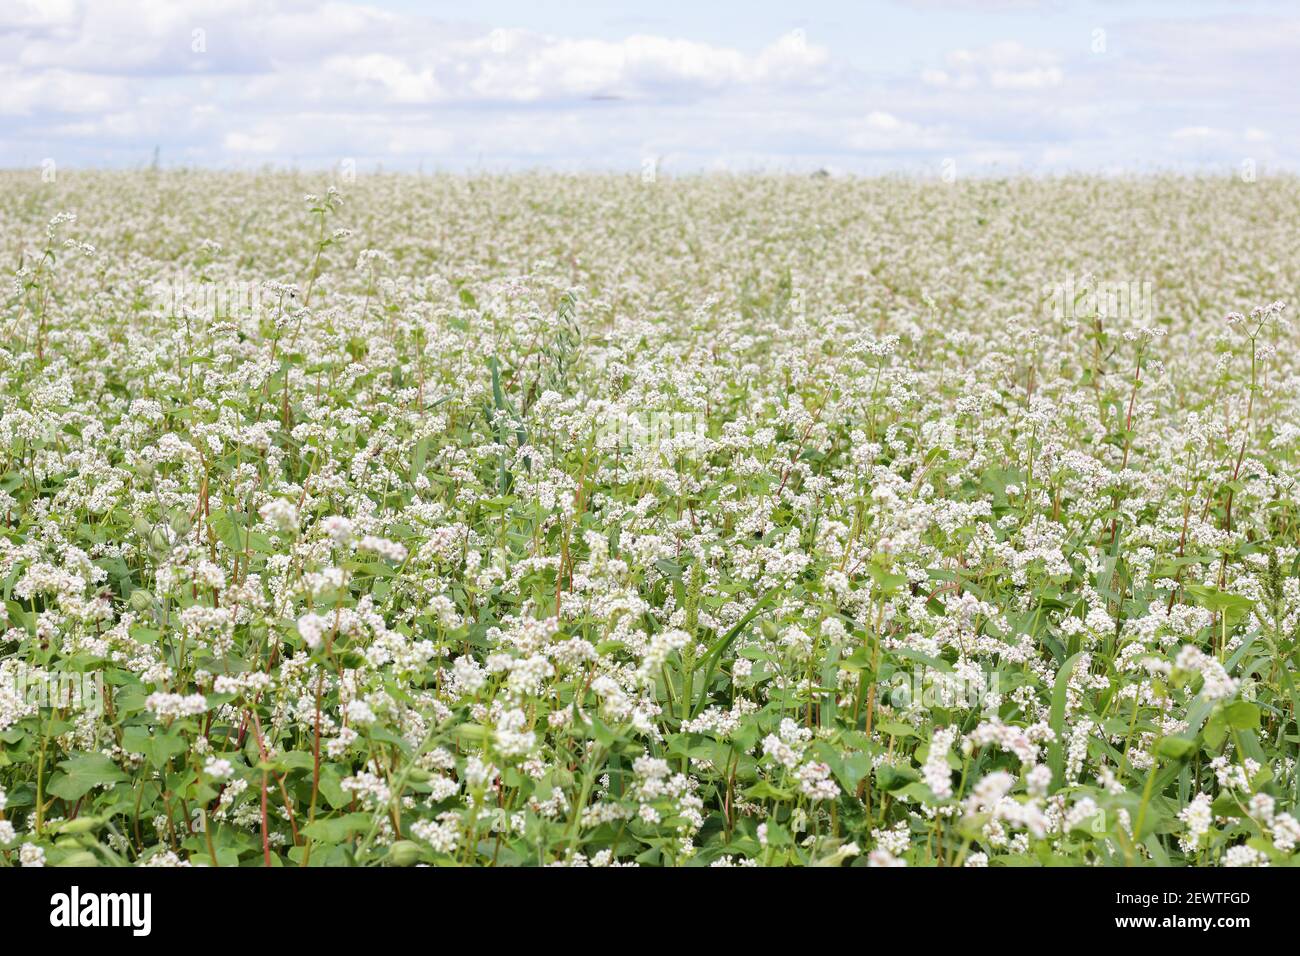 Buckwheat plant on agriculture field bloomong with white flowers, eco farming background or texture, closeup, organic agriculture and horticulture con Stock Photo